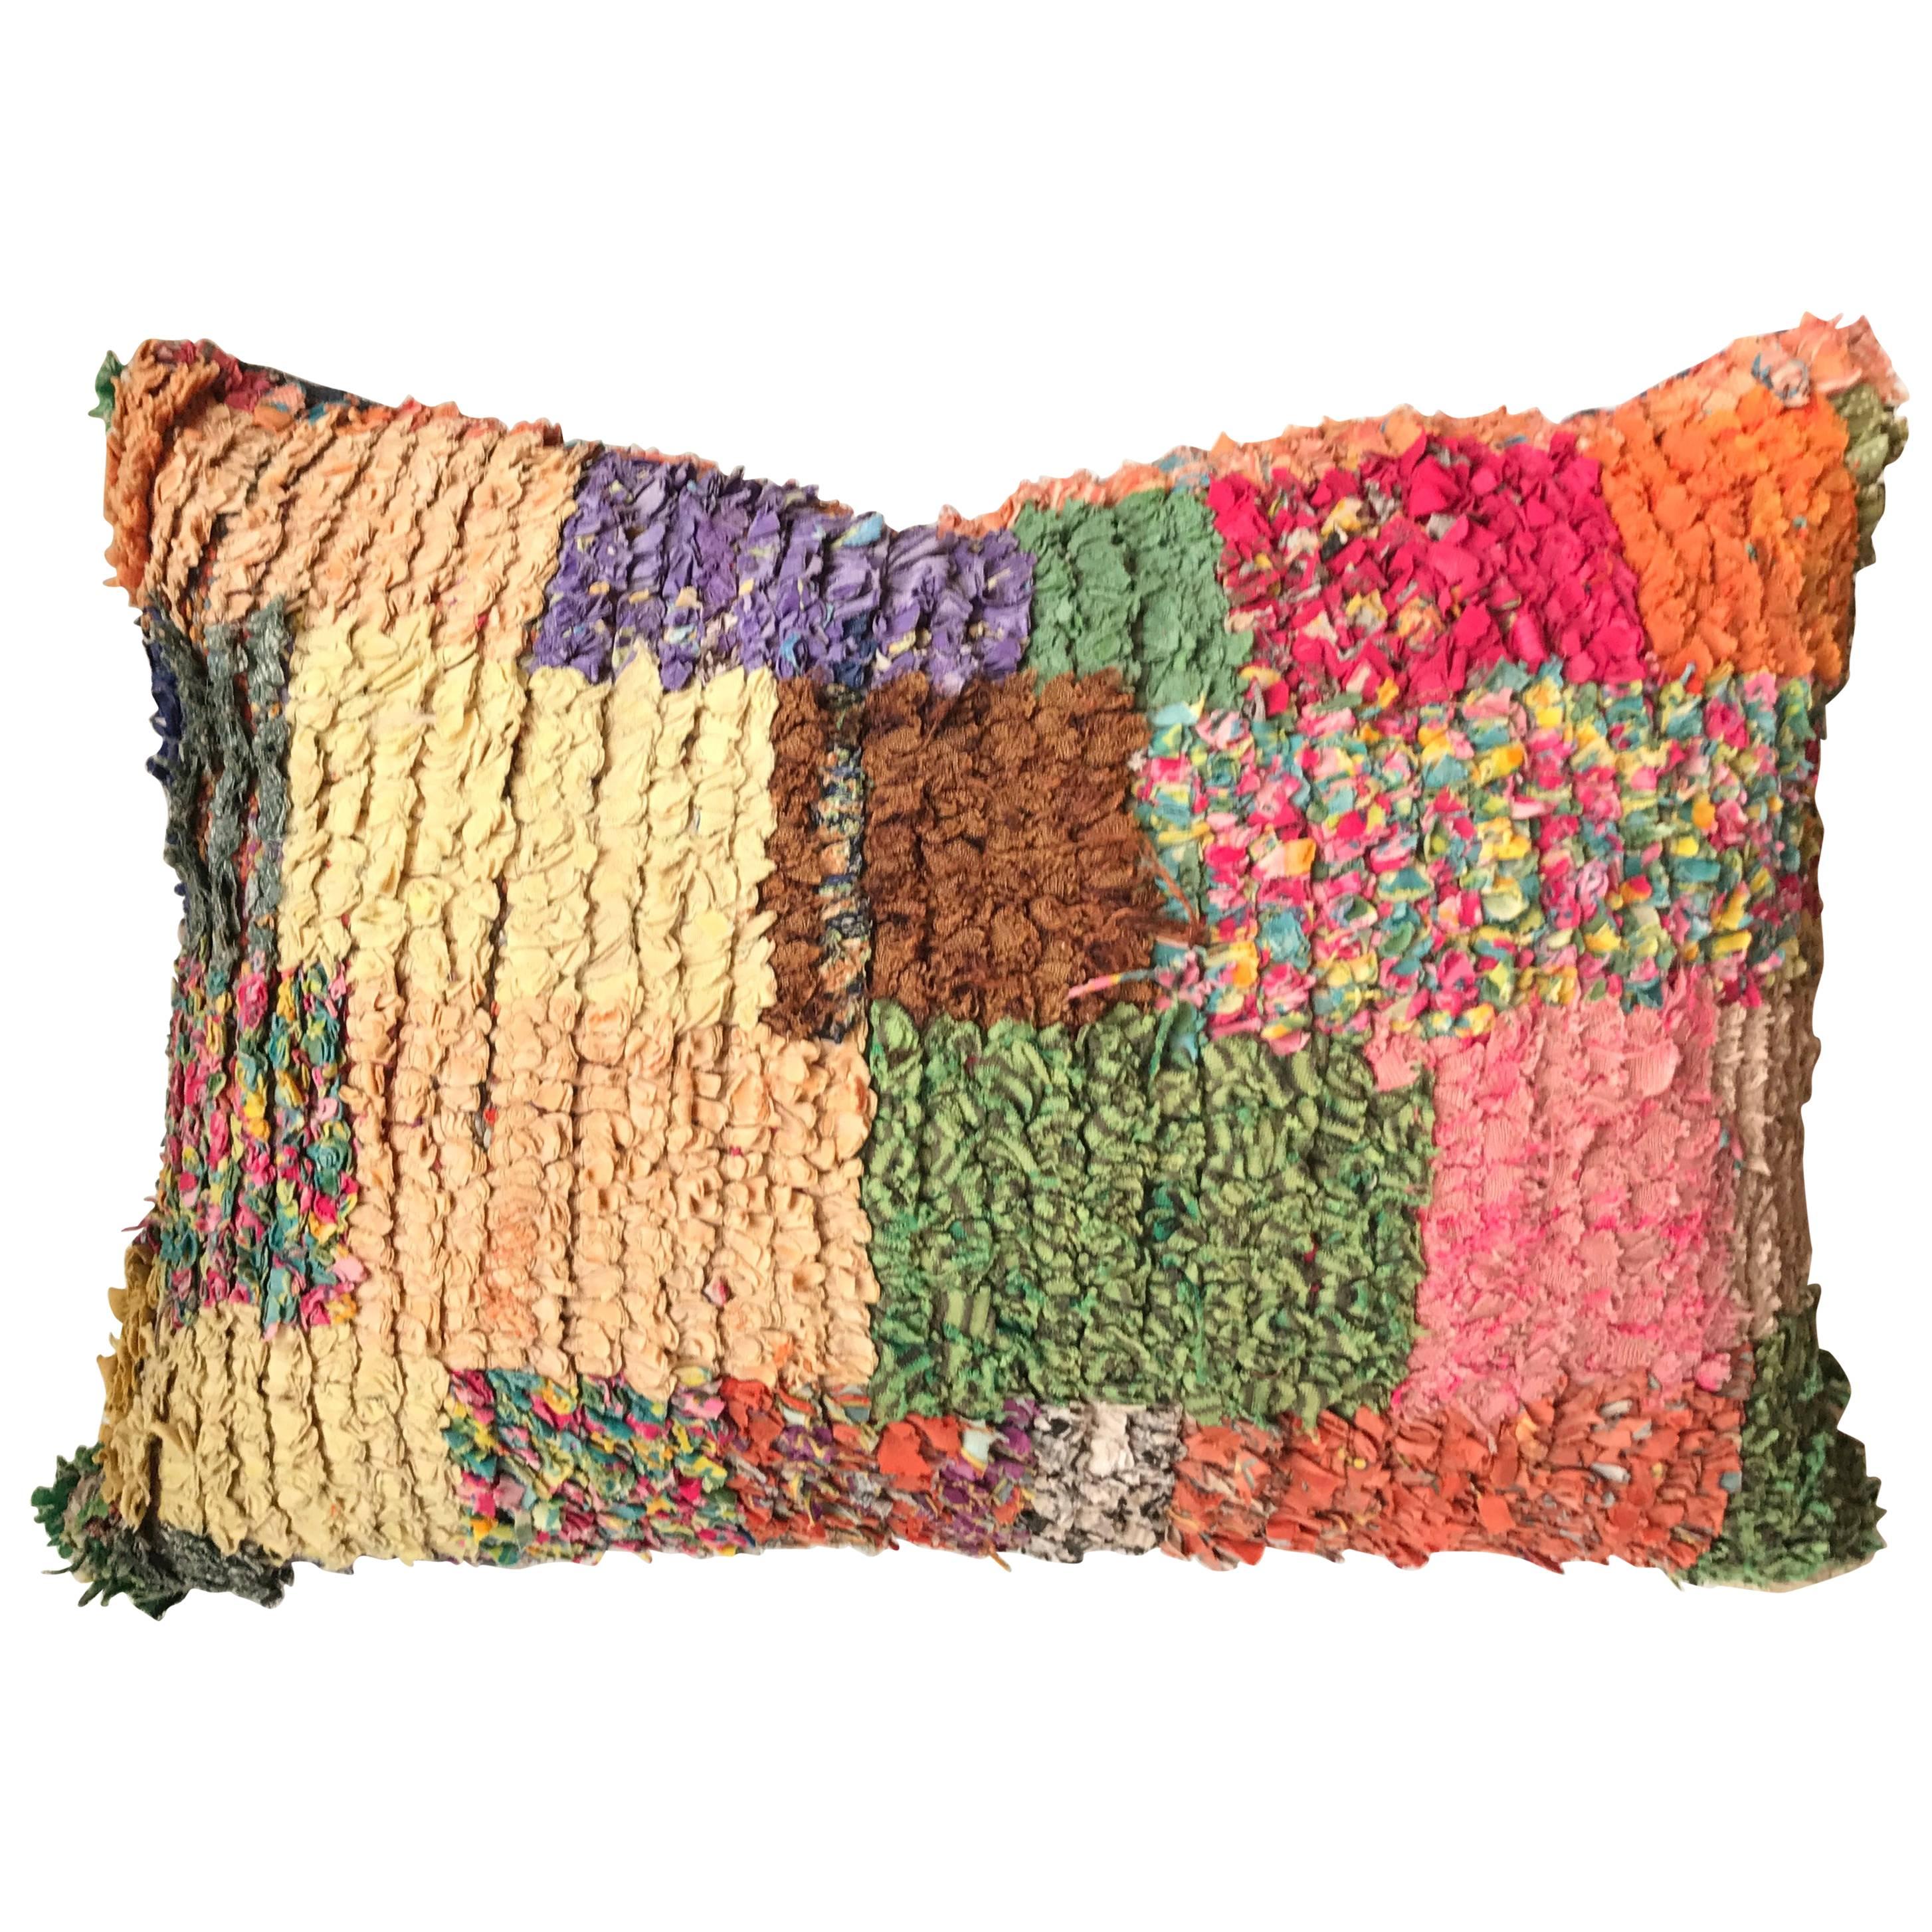 Custom Pillow Cut from a Vintage Moroccan Hand-Loomed Bouchouite Berber Rug